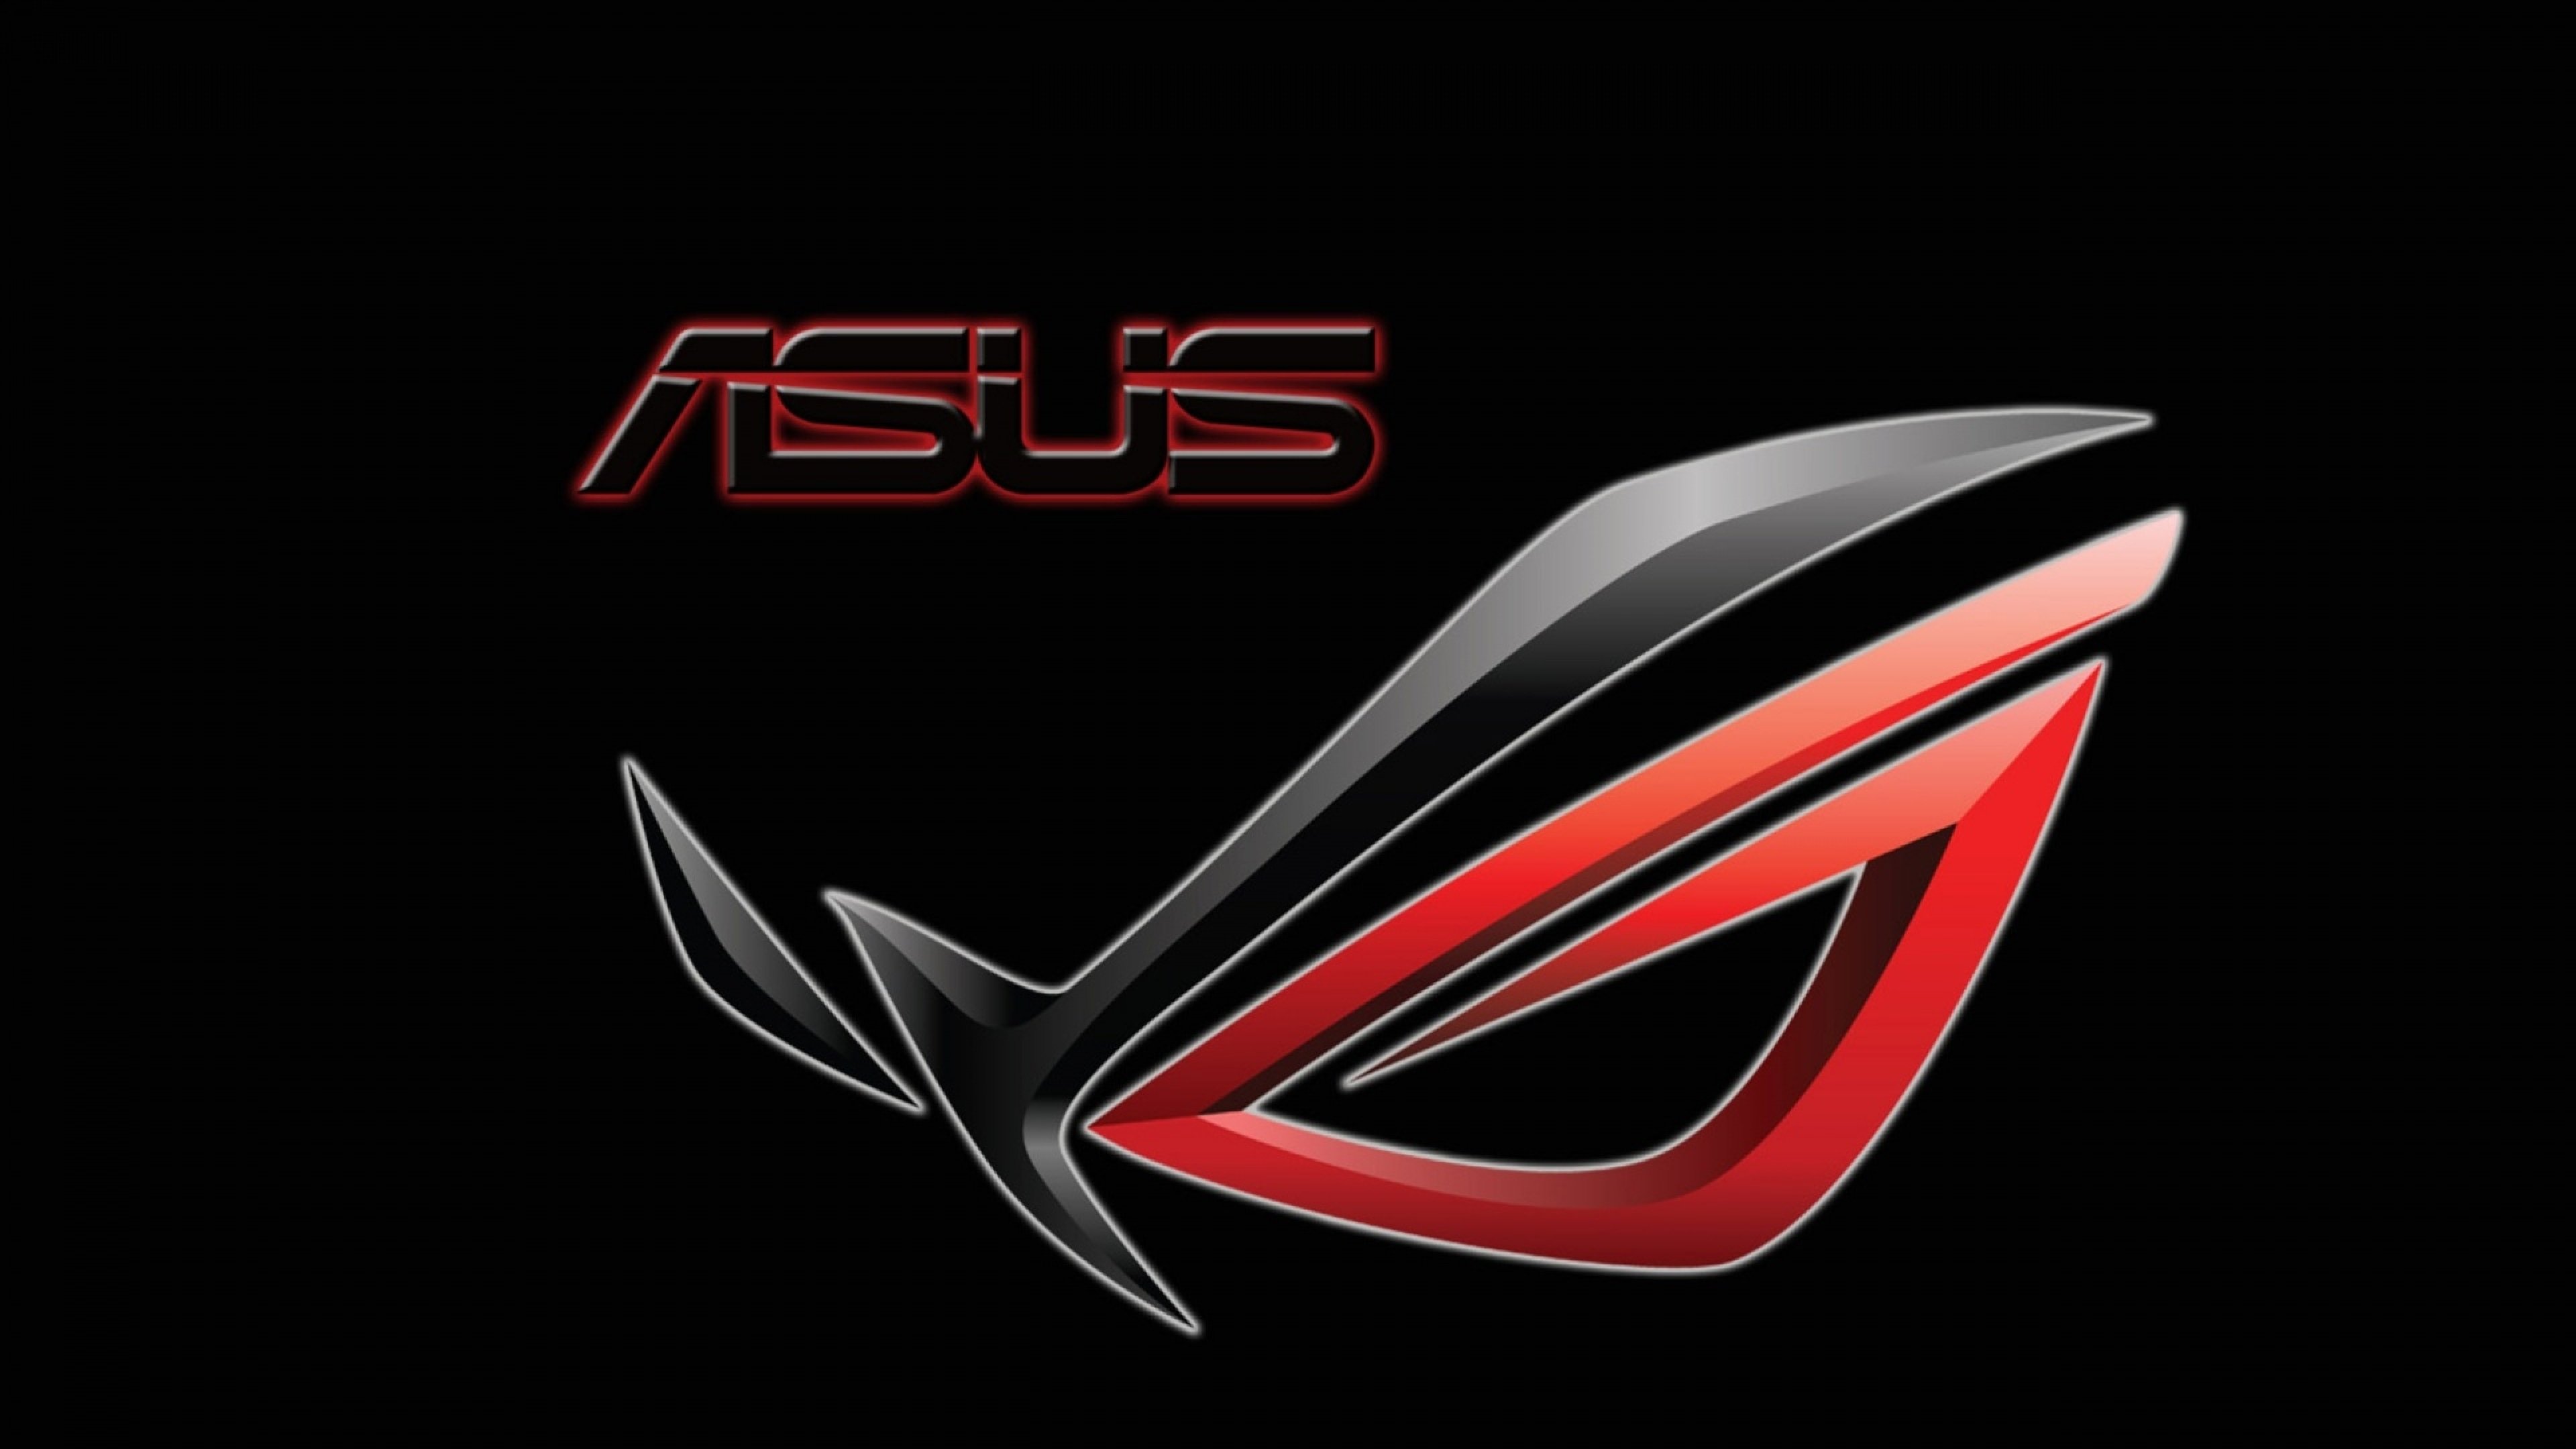  Asus Computers Company Logo Shadow Wallpaper Background 4K Ultra 3840x2160